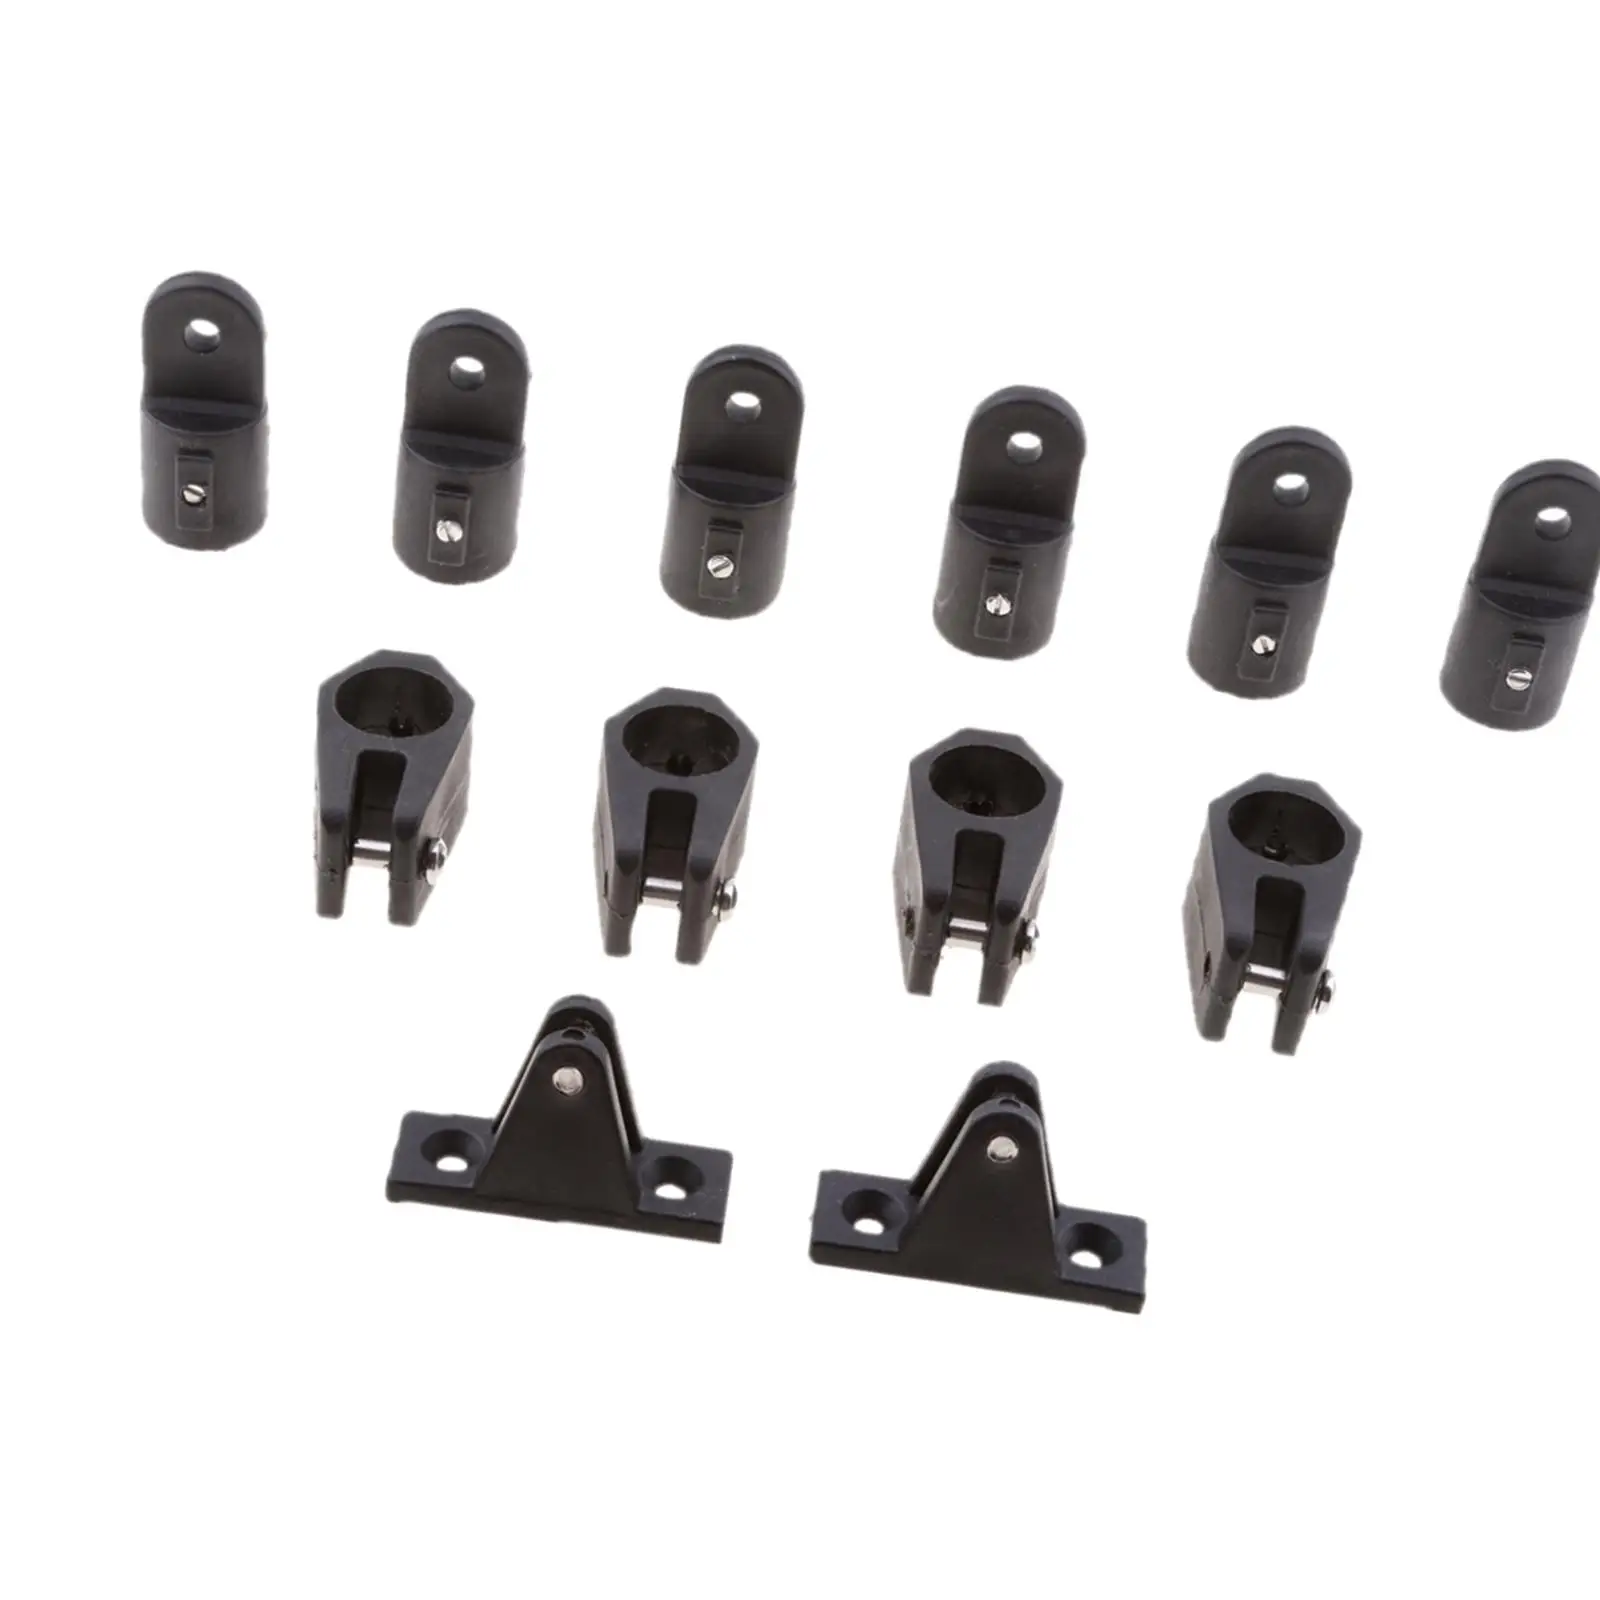 12 PCS Nylon Canopy 3 Bow Boat Top Cover  Fittings  Set 7/8 inch 22mm  RV - Black